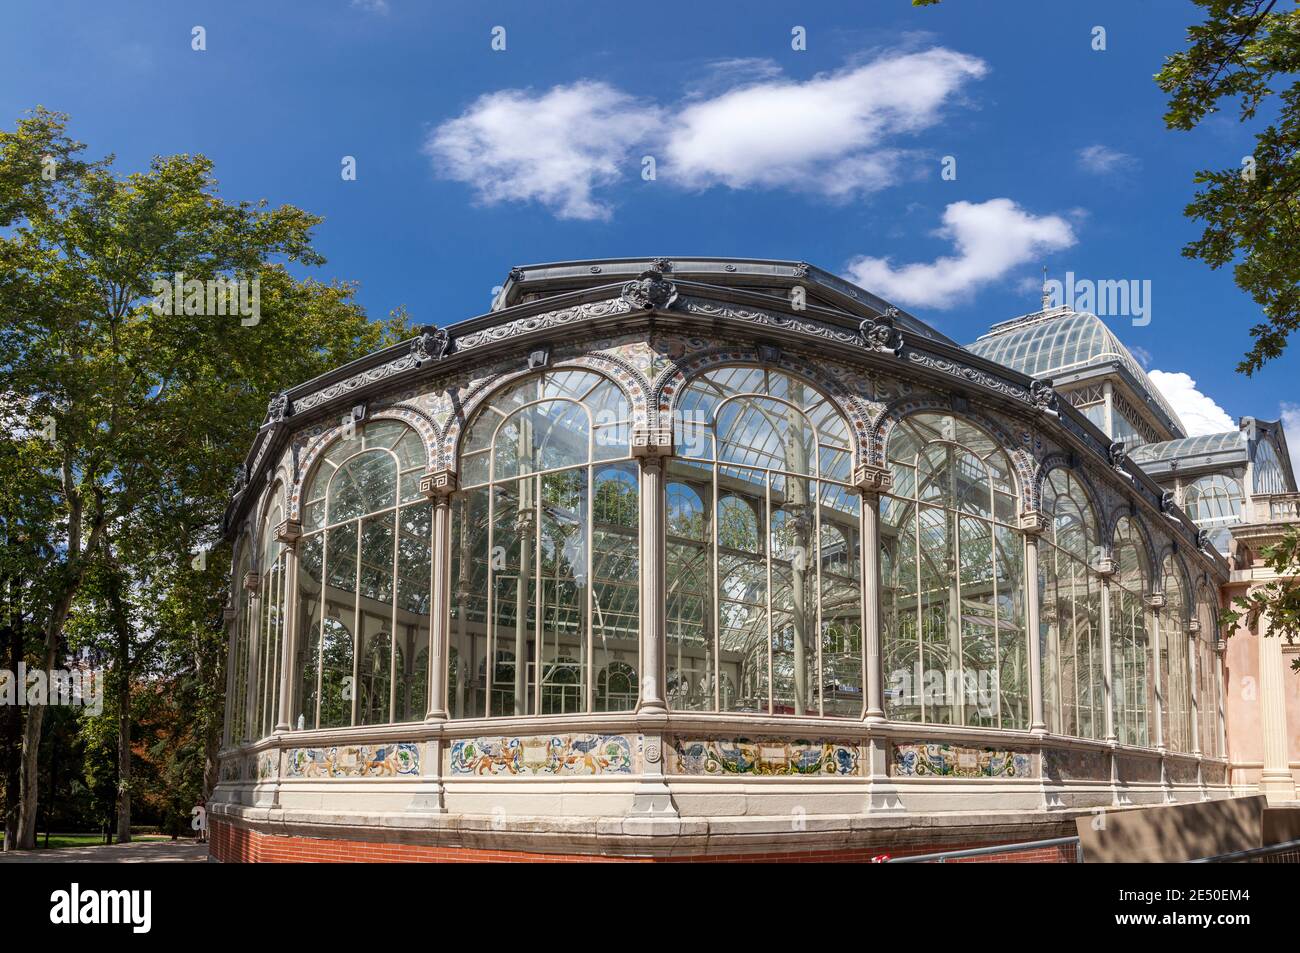 Palacio de Cristal, or The Crystal Palace, a beautiful old mansion made primarily of crystal and used for events, in the Retiro Park, in Madrid, Spain Stock Photo